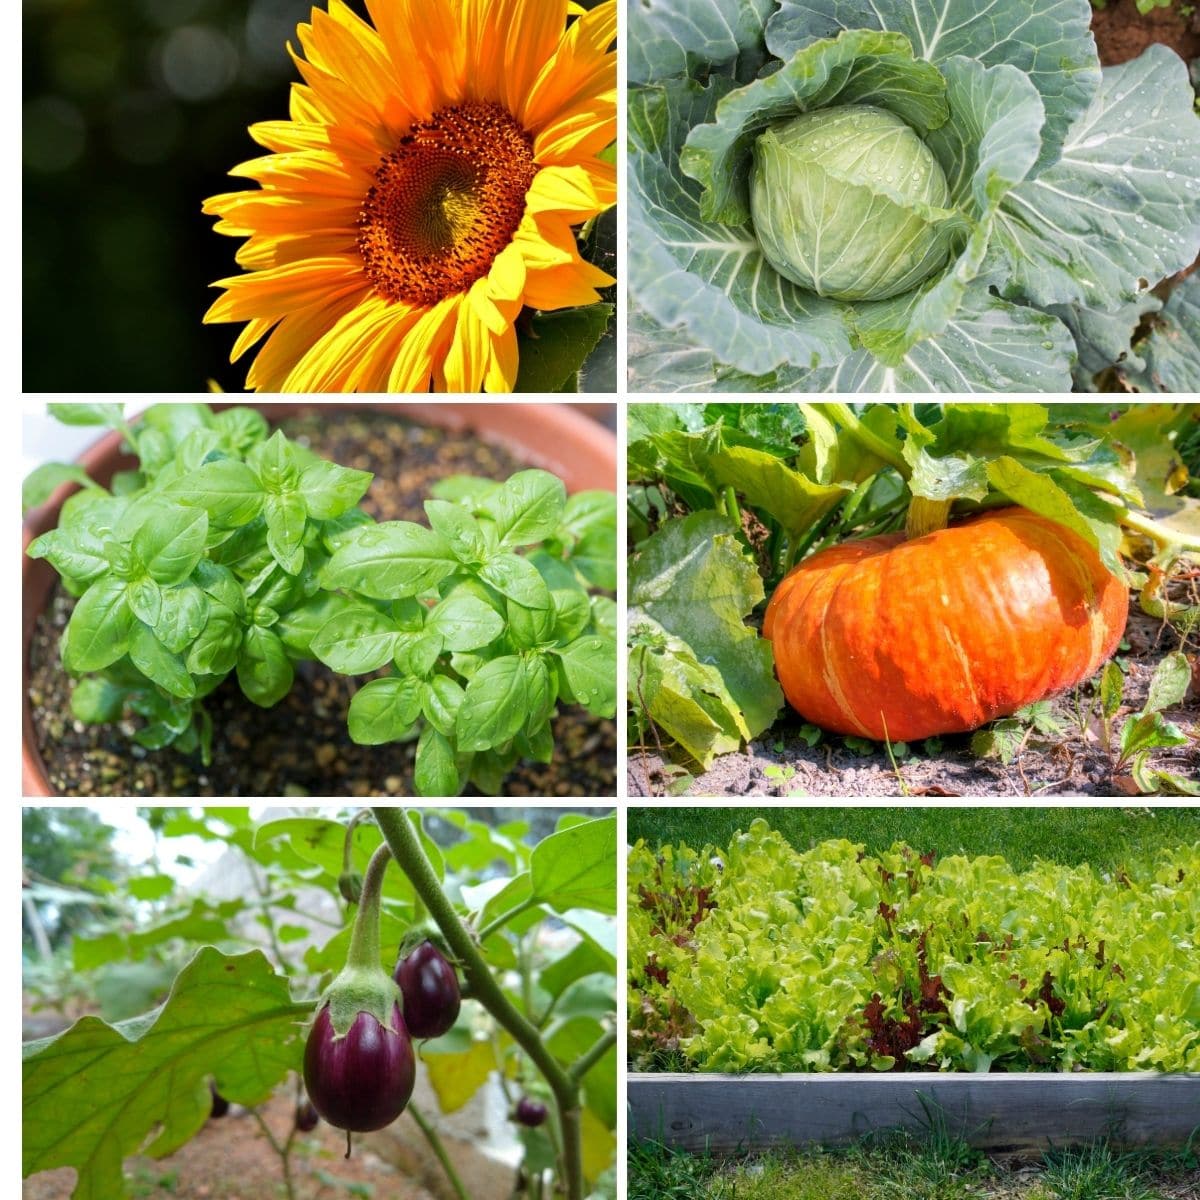 Photo collage featuring non compatible plants from the article.